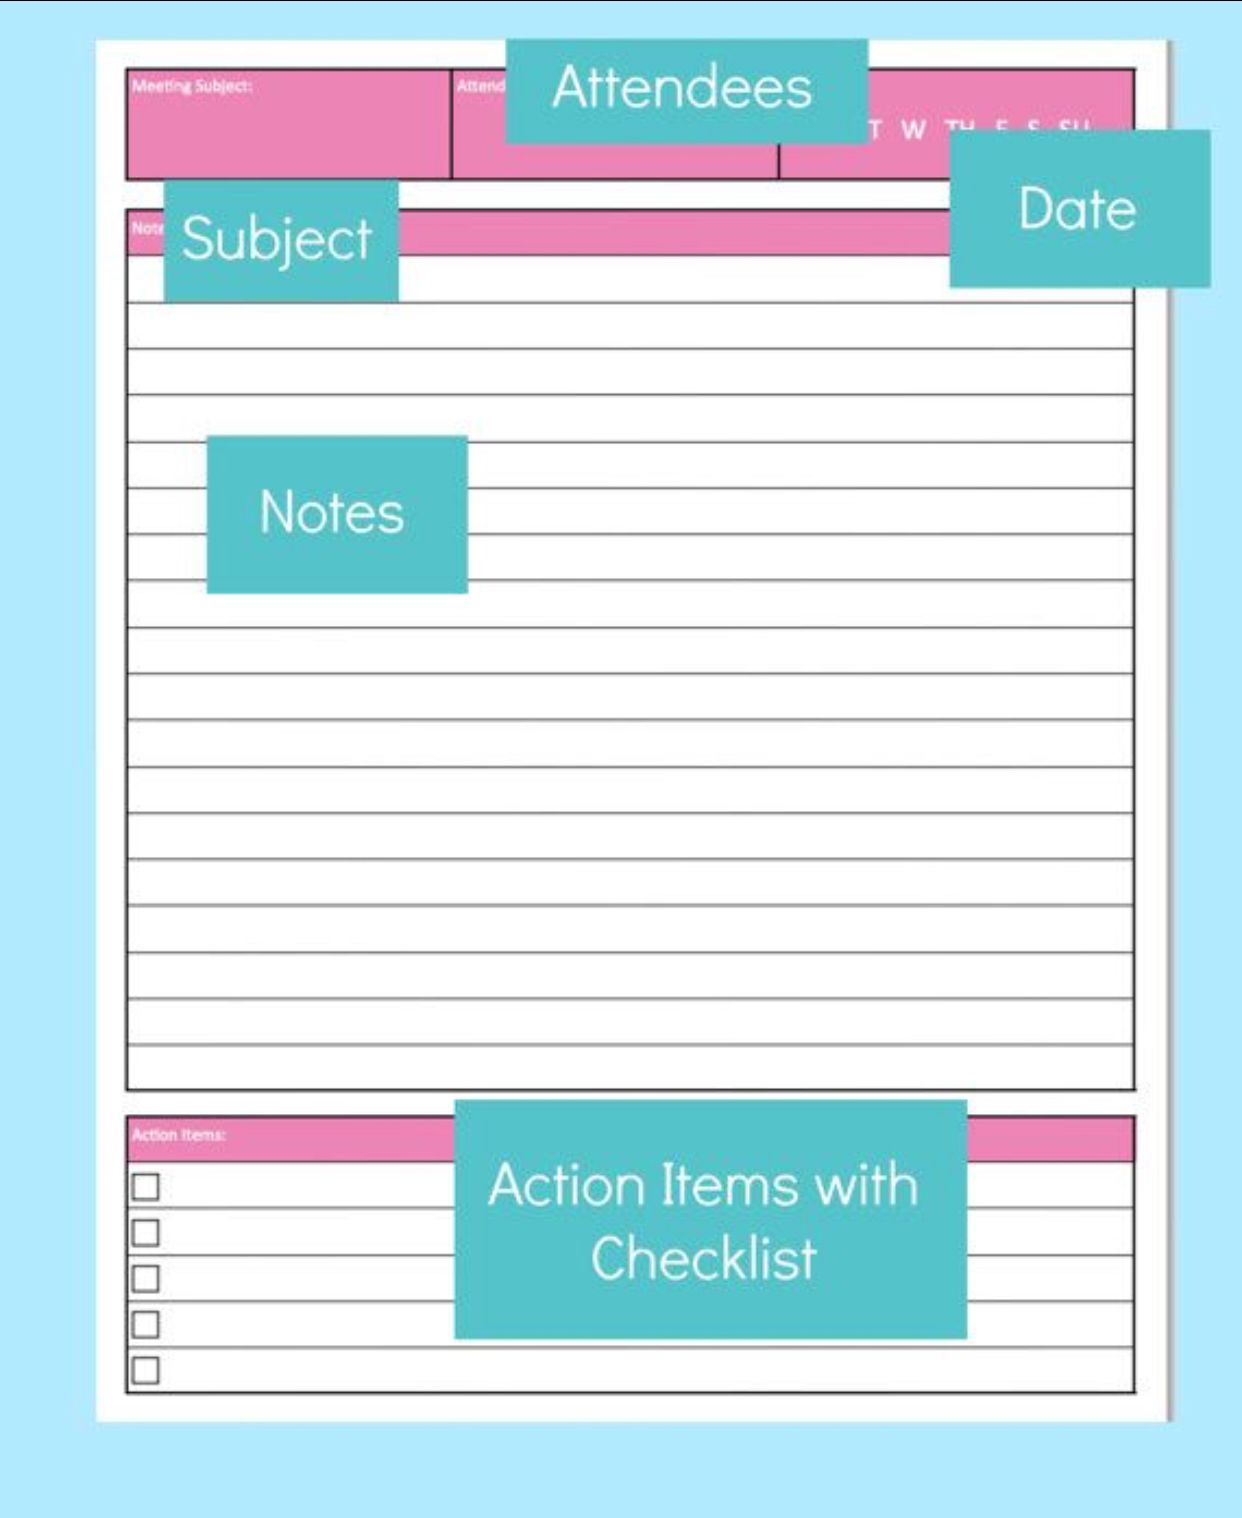 note-taking-templates-for-meetings-i-would-rocketbook